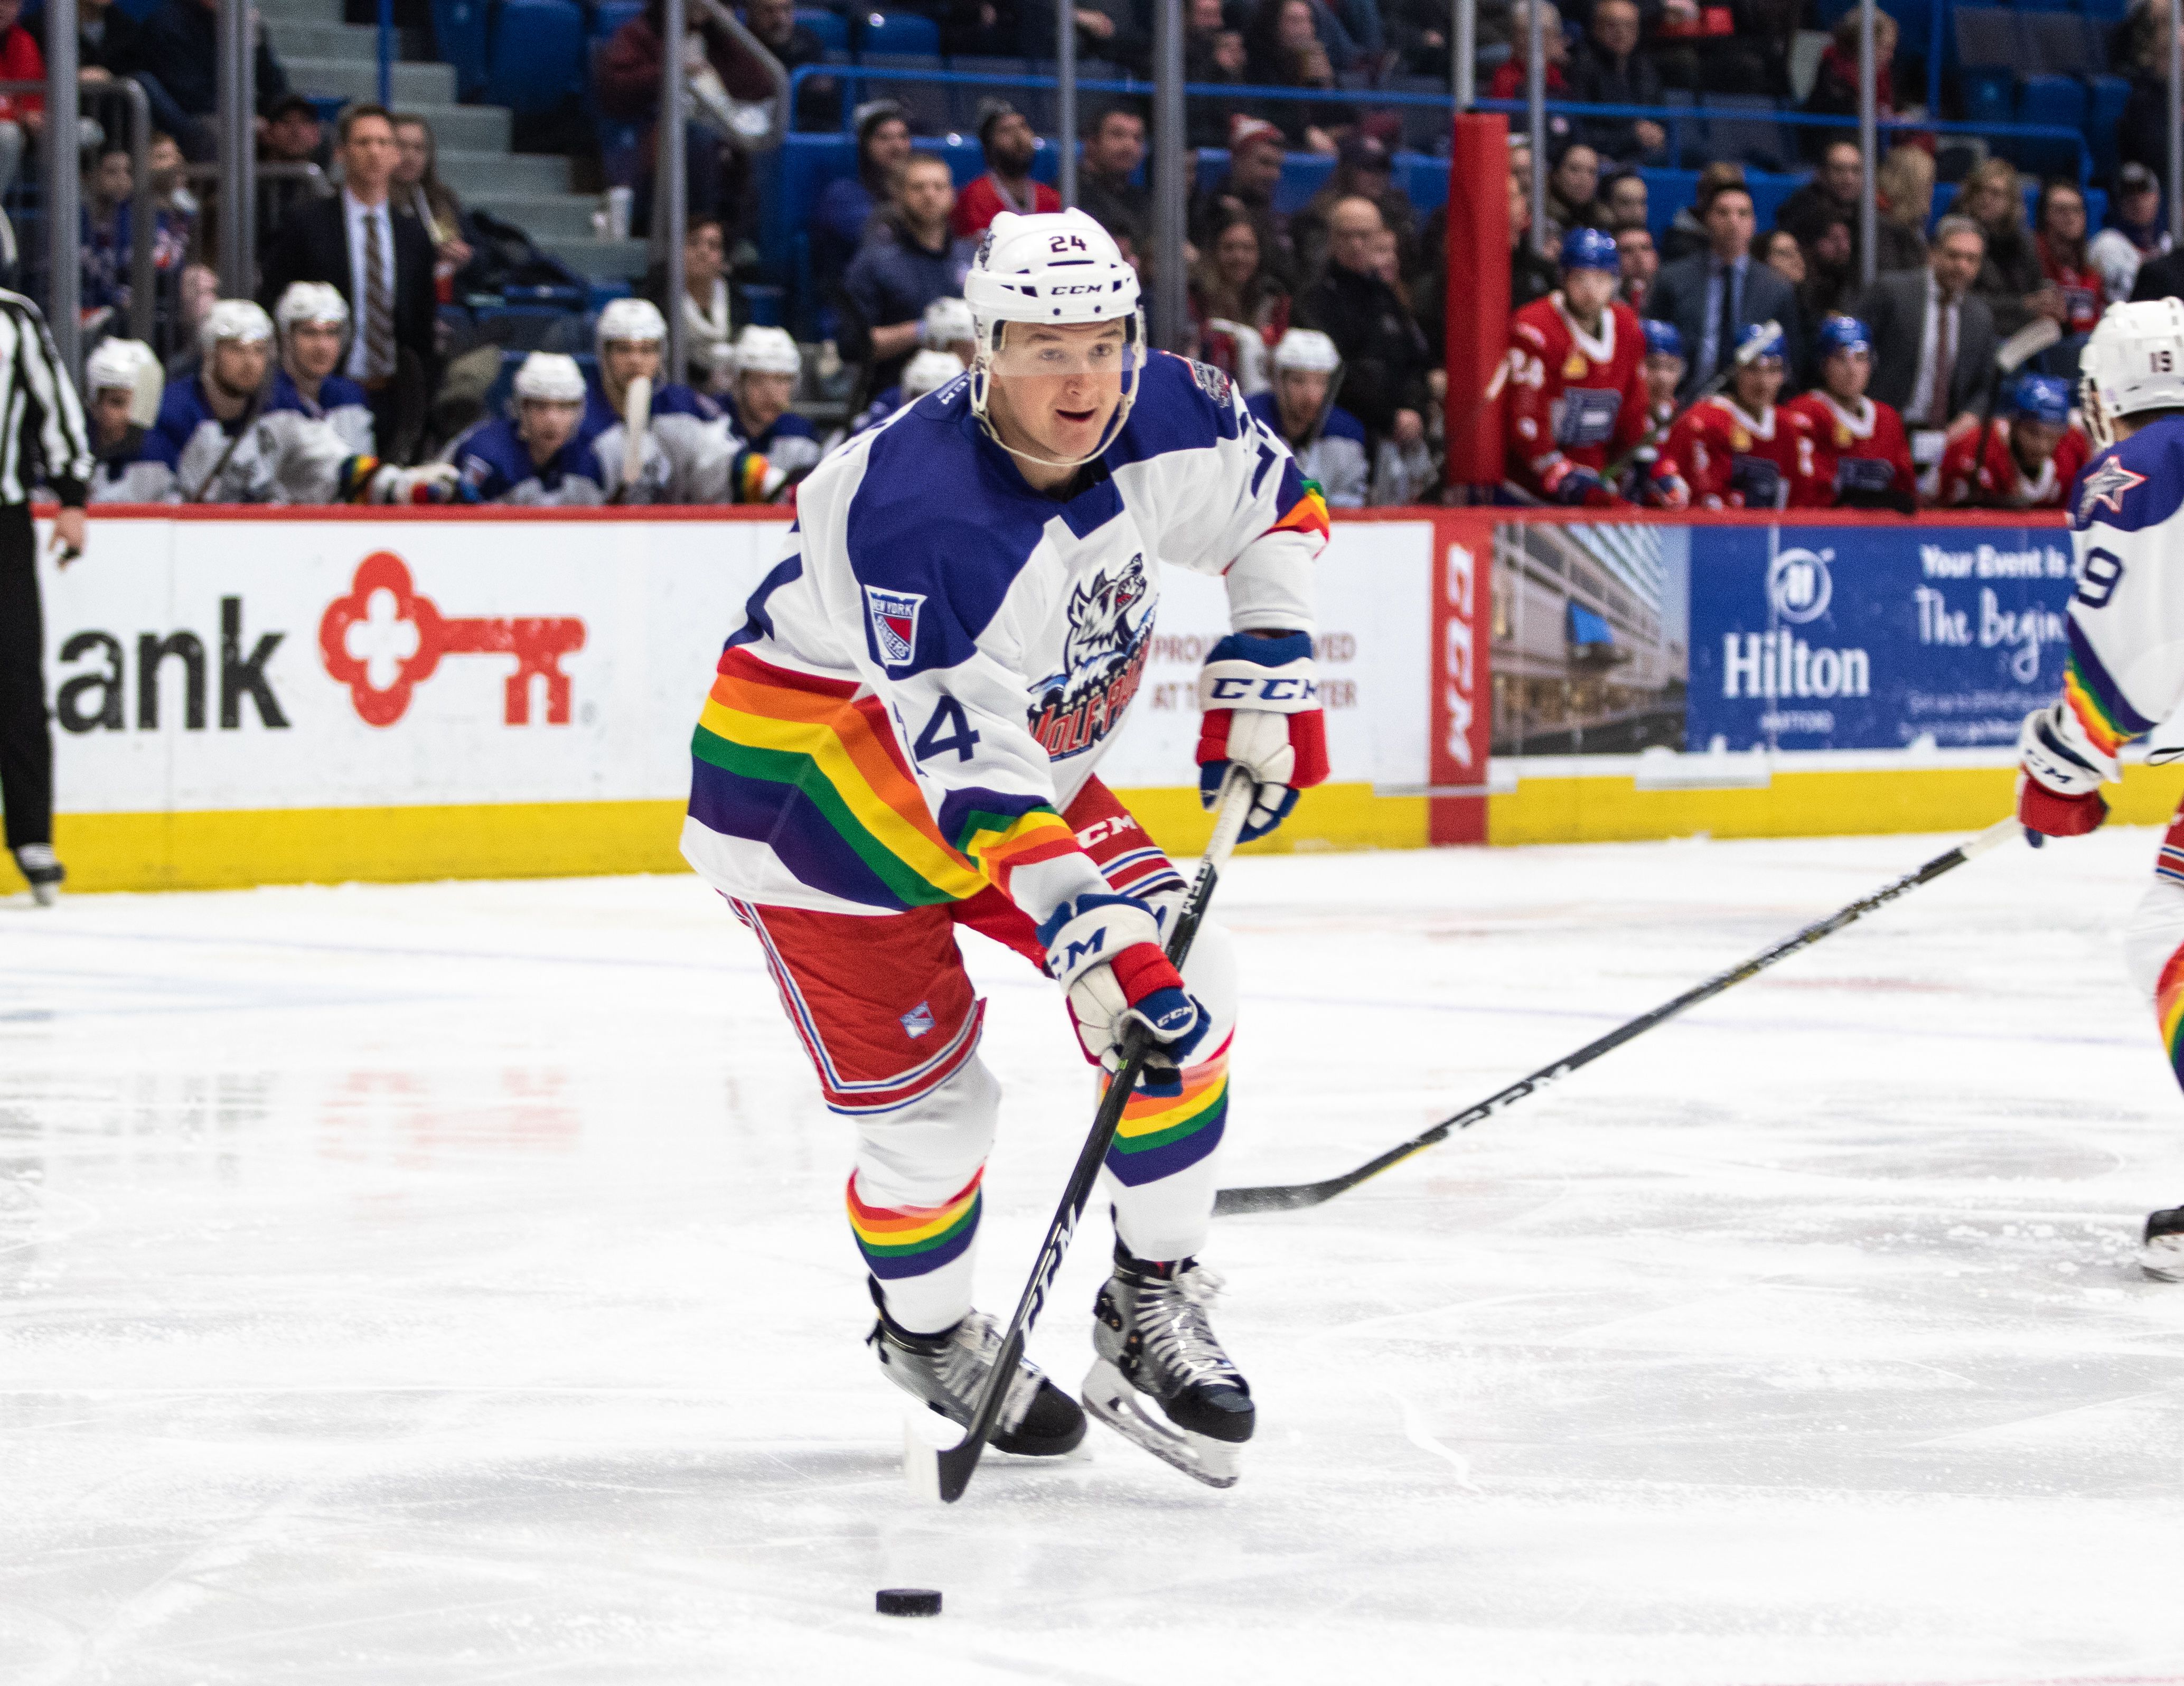 Syracuse Crunch owner Howard Dolgon on Pride Night jerseys: 'This